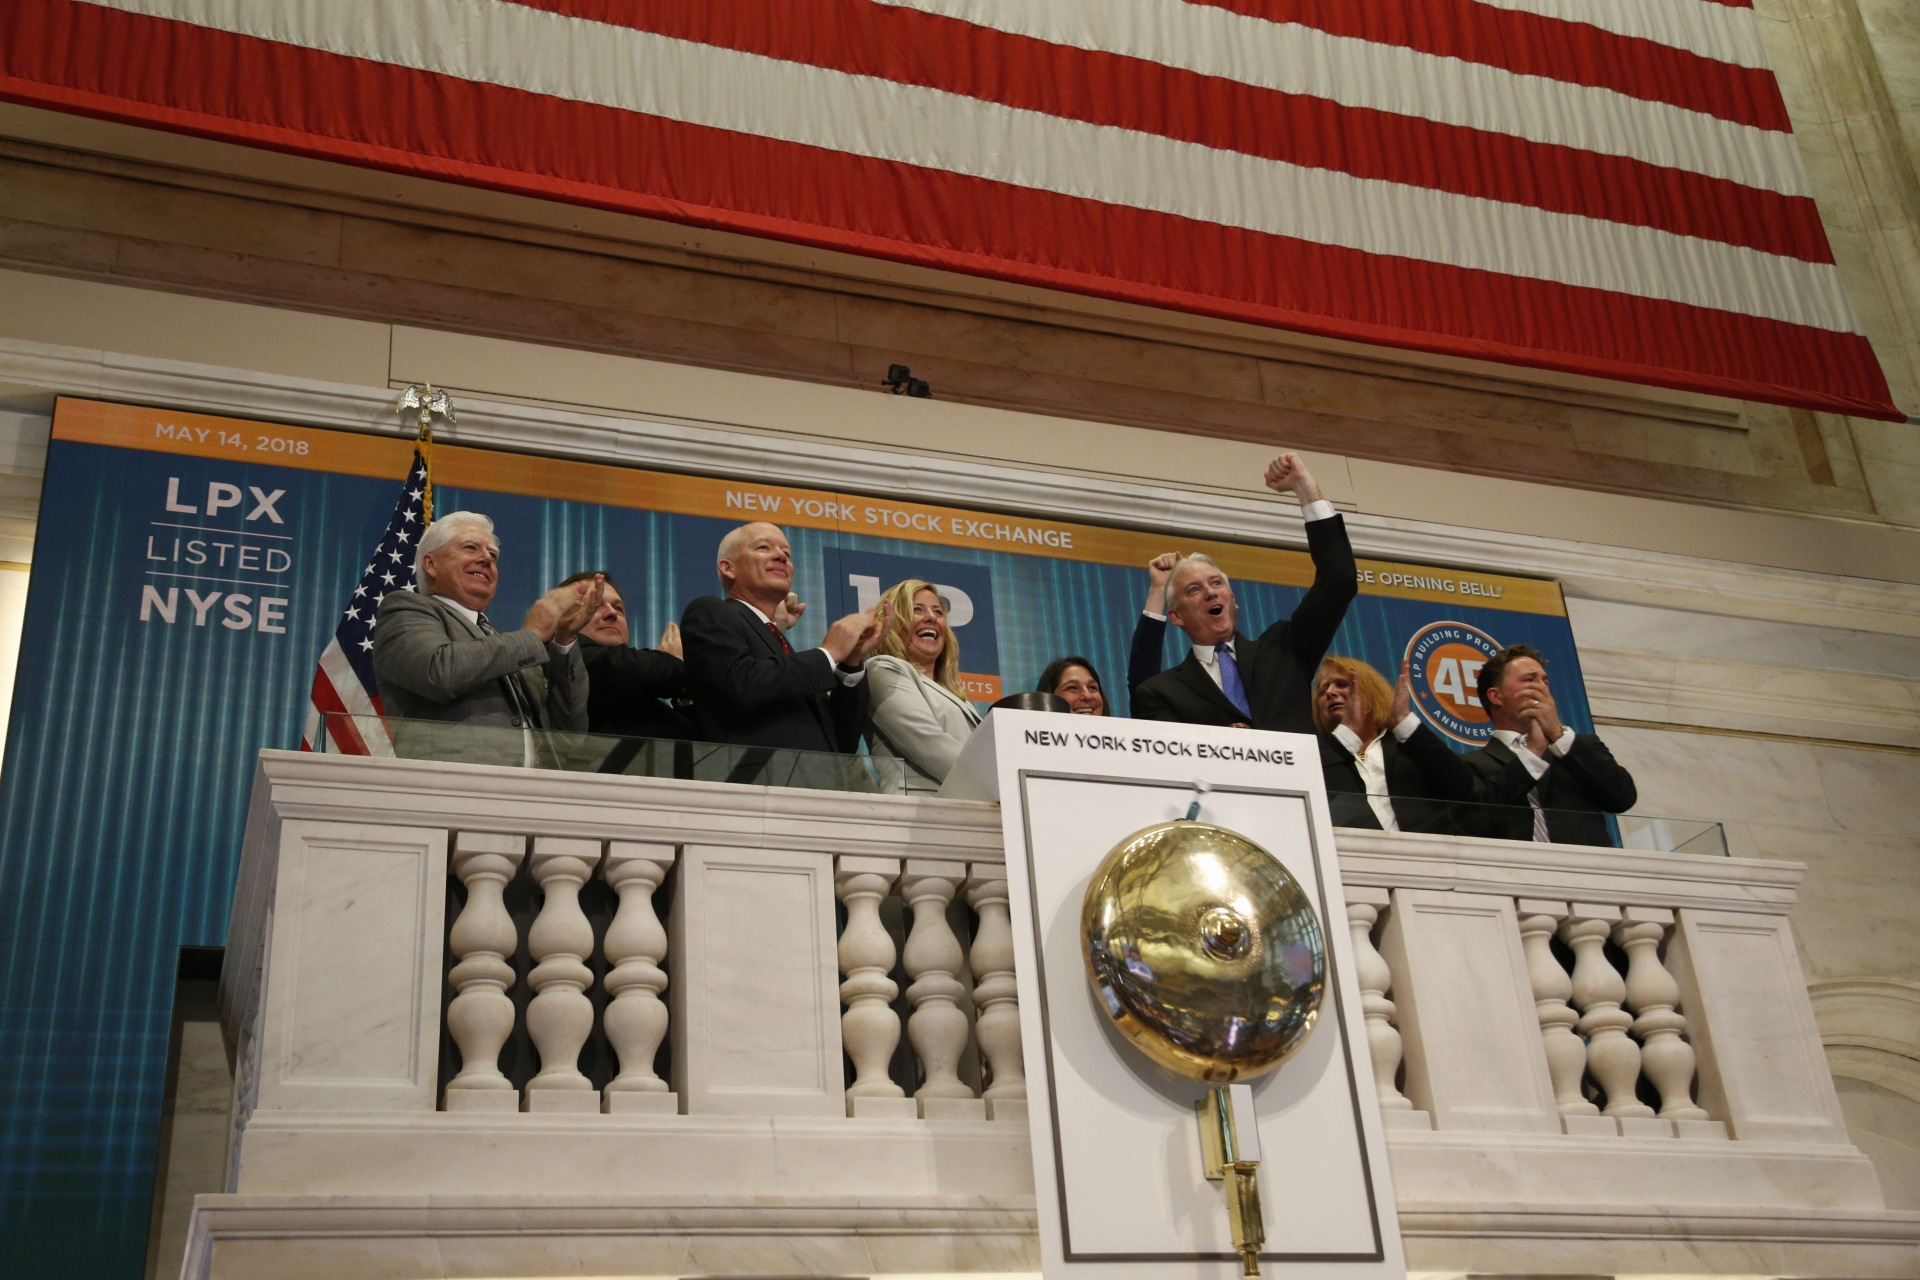 LP Hosts Investors and Rings Opening Bell at New York Stock Exchange Blog